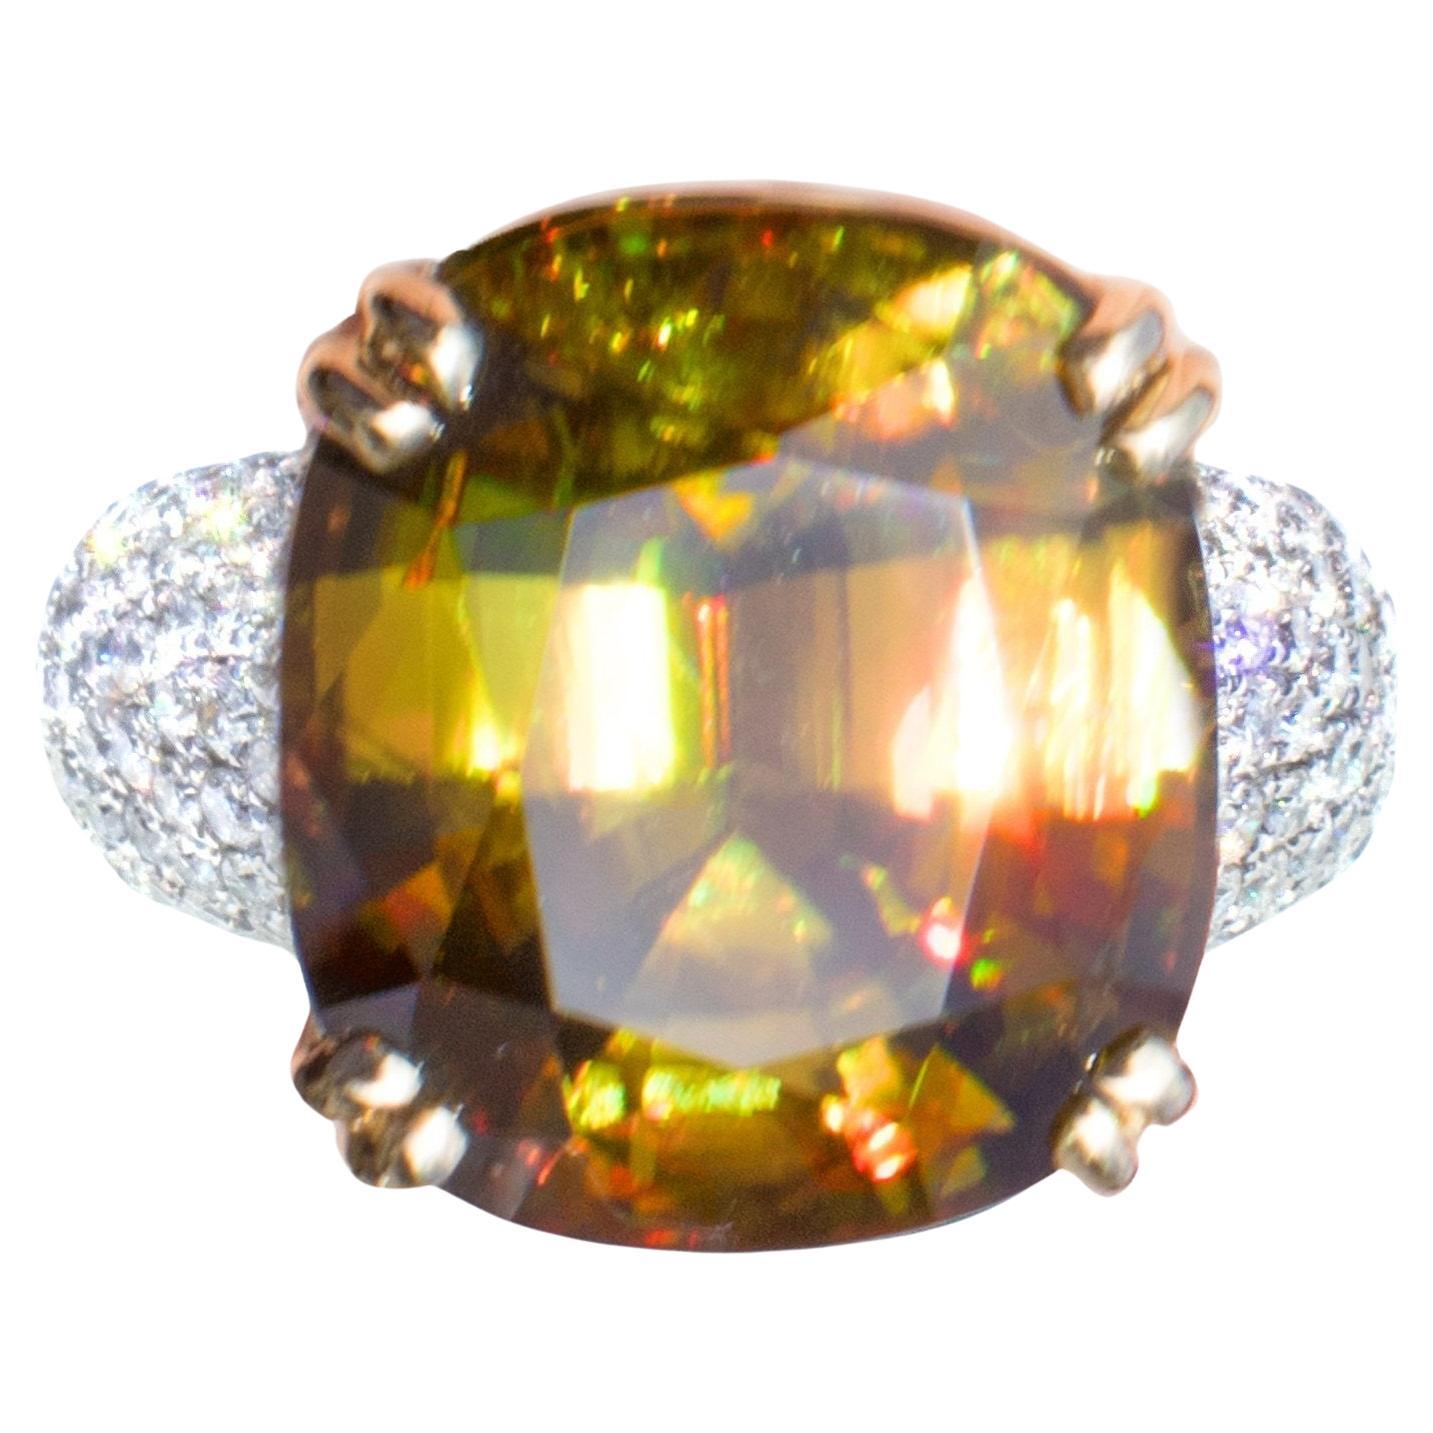 Sophistication Unveiled:

Behold this resplendent cocktail ring, a true masterpiece meticulously crafted in solid 18K yellow gold. At its heart lies a magnificent fancy cushion-cut AAA Sphene gemstone, adorned with an array of colorless, pave-set